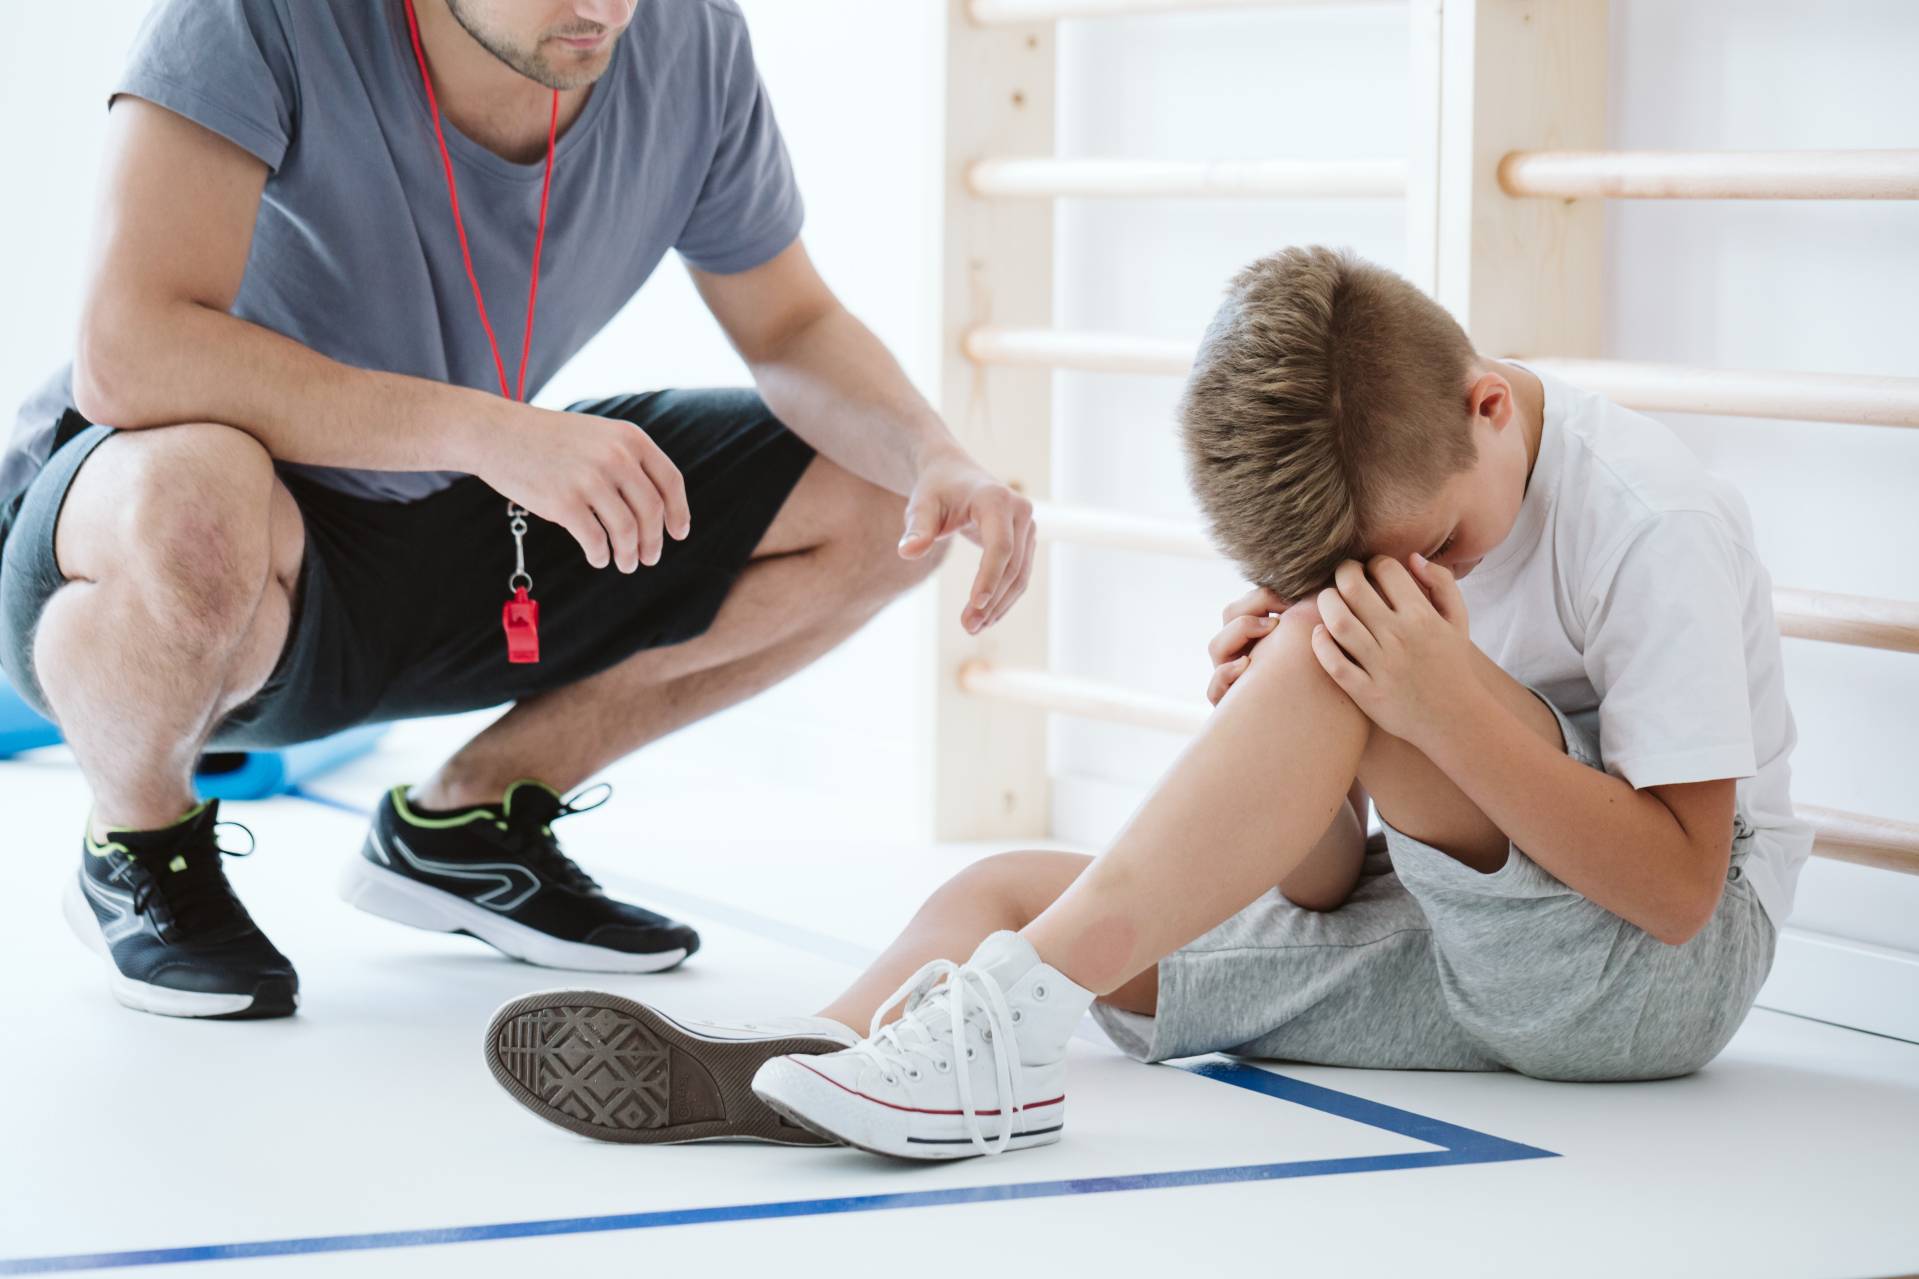 Sports injury prevention: how to protect your children